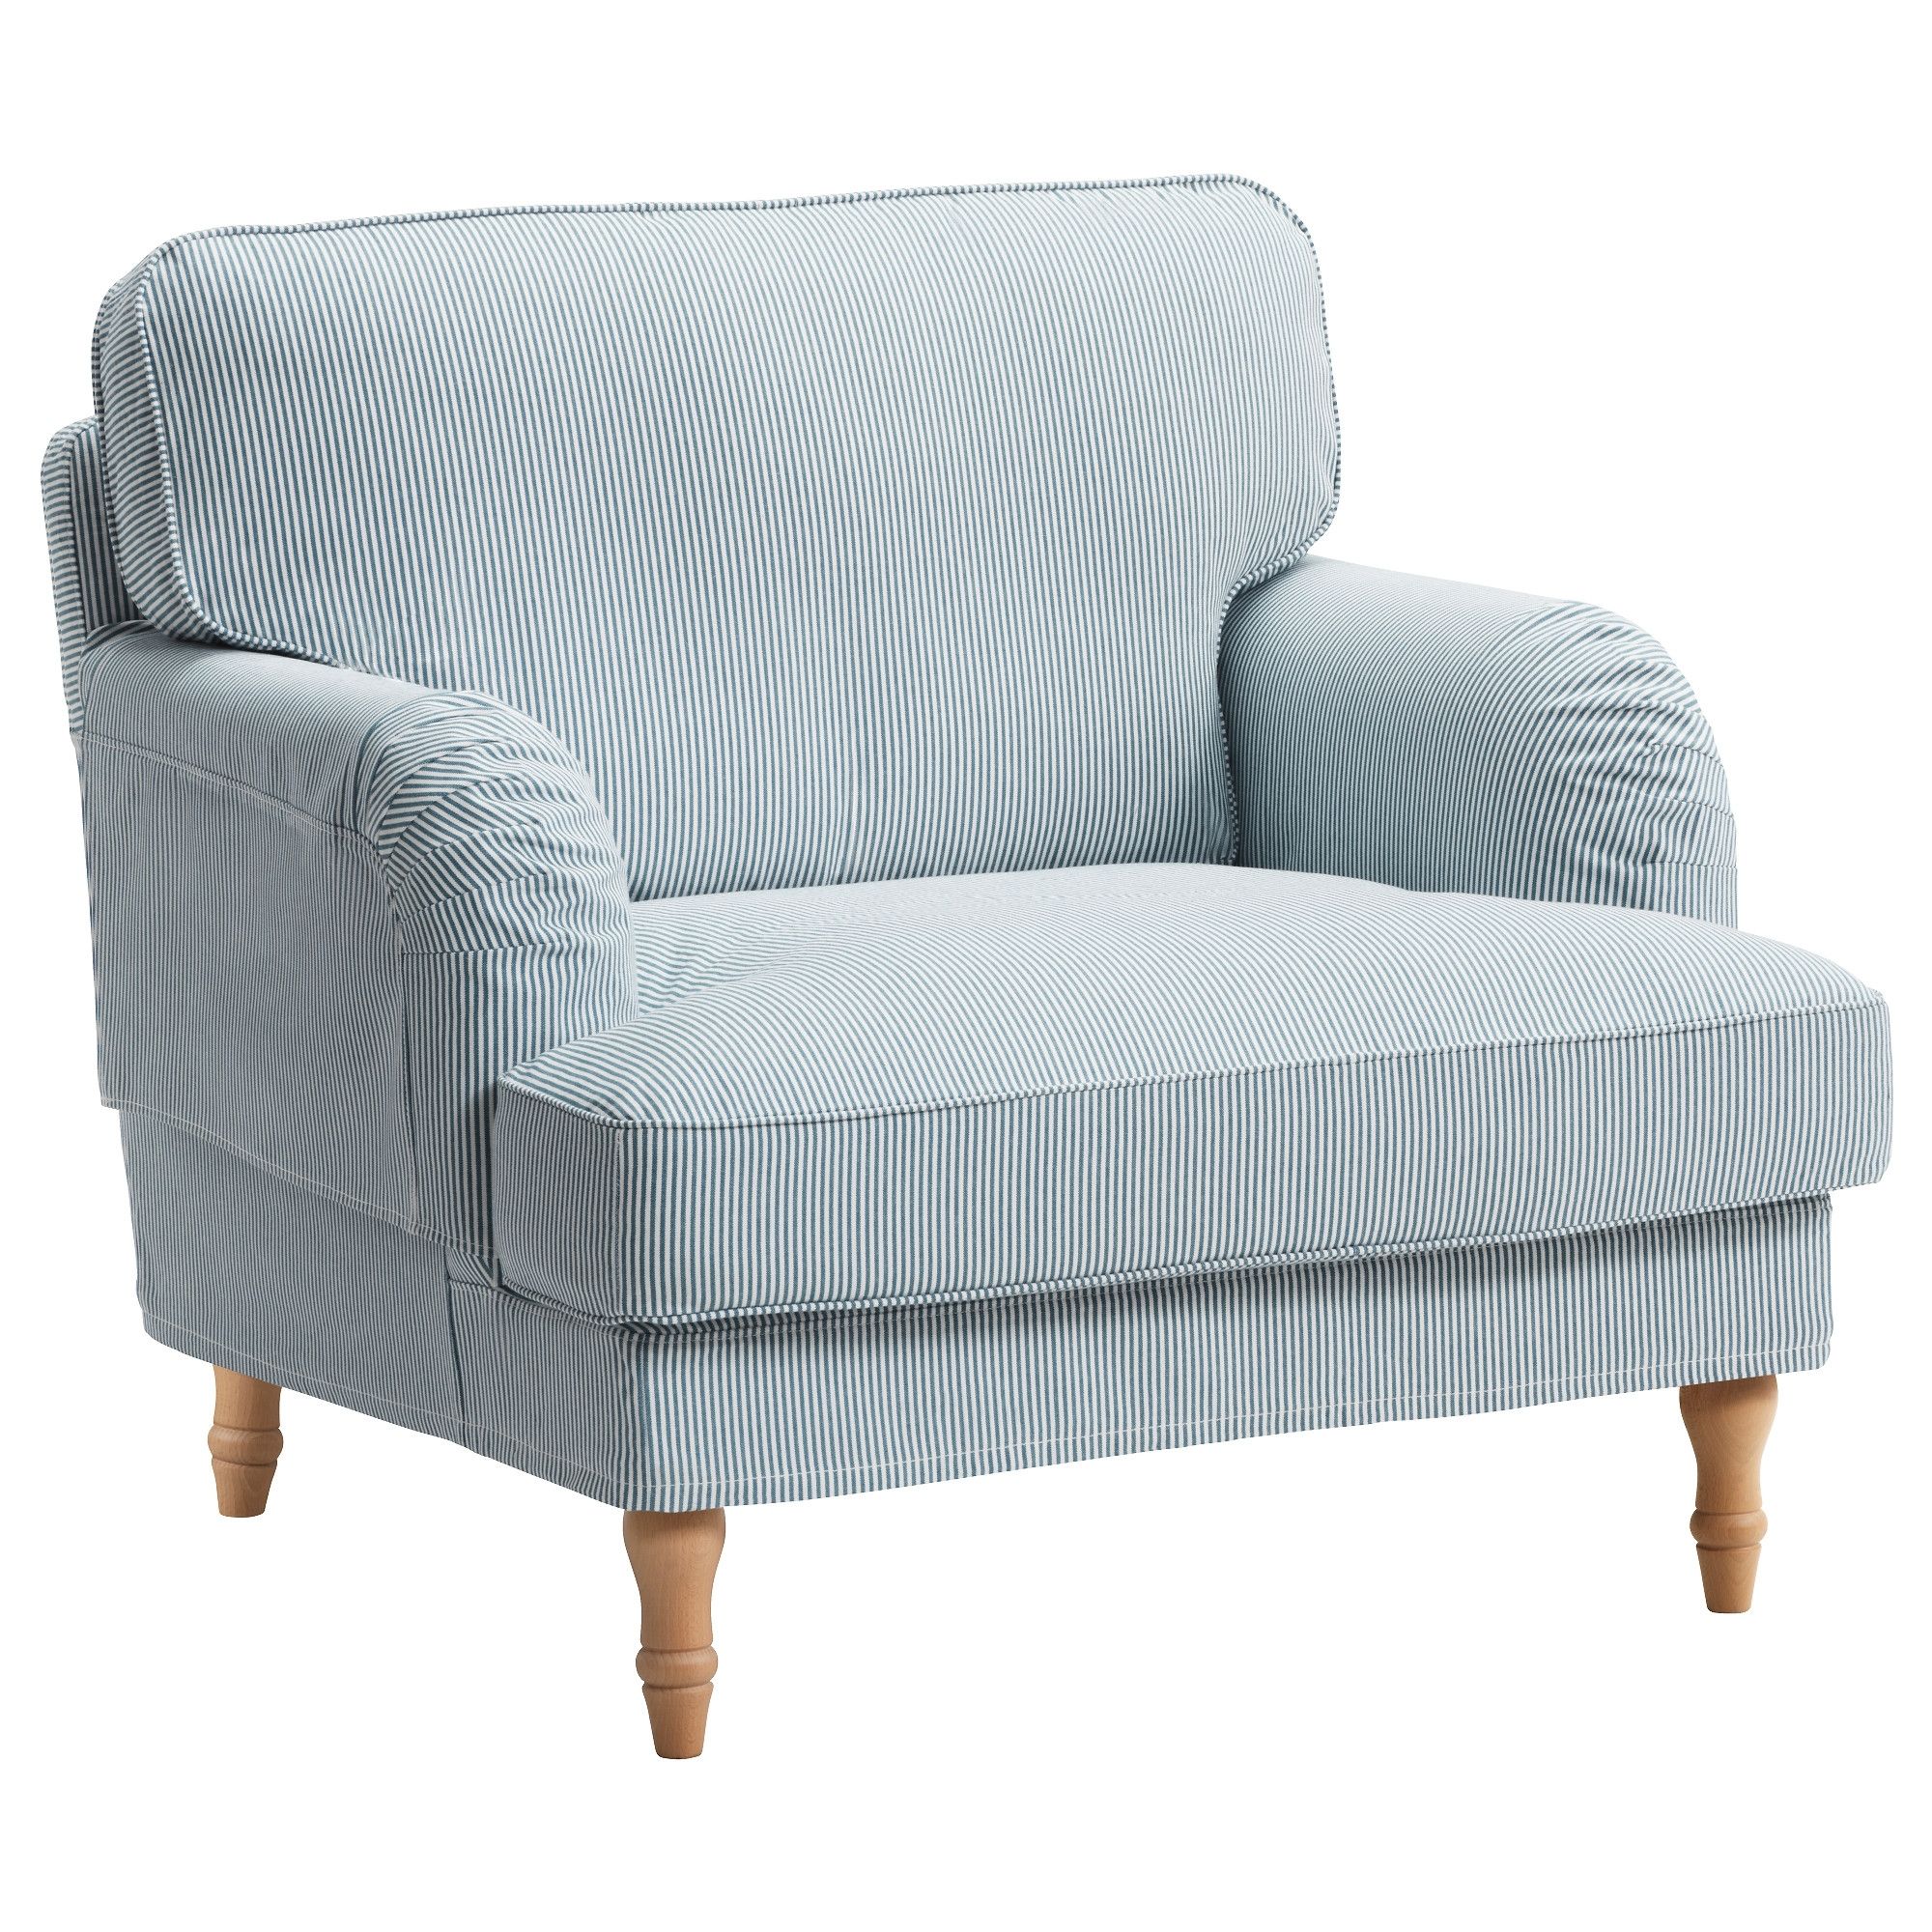 Famous Wide Sofa Chairs Within Stocksund Armchair, Ljungen Blue, Light Brown/wood (View 15 of 15)